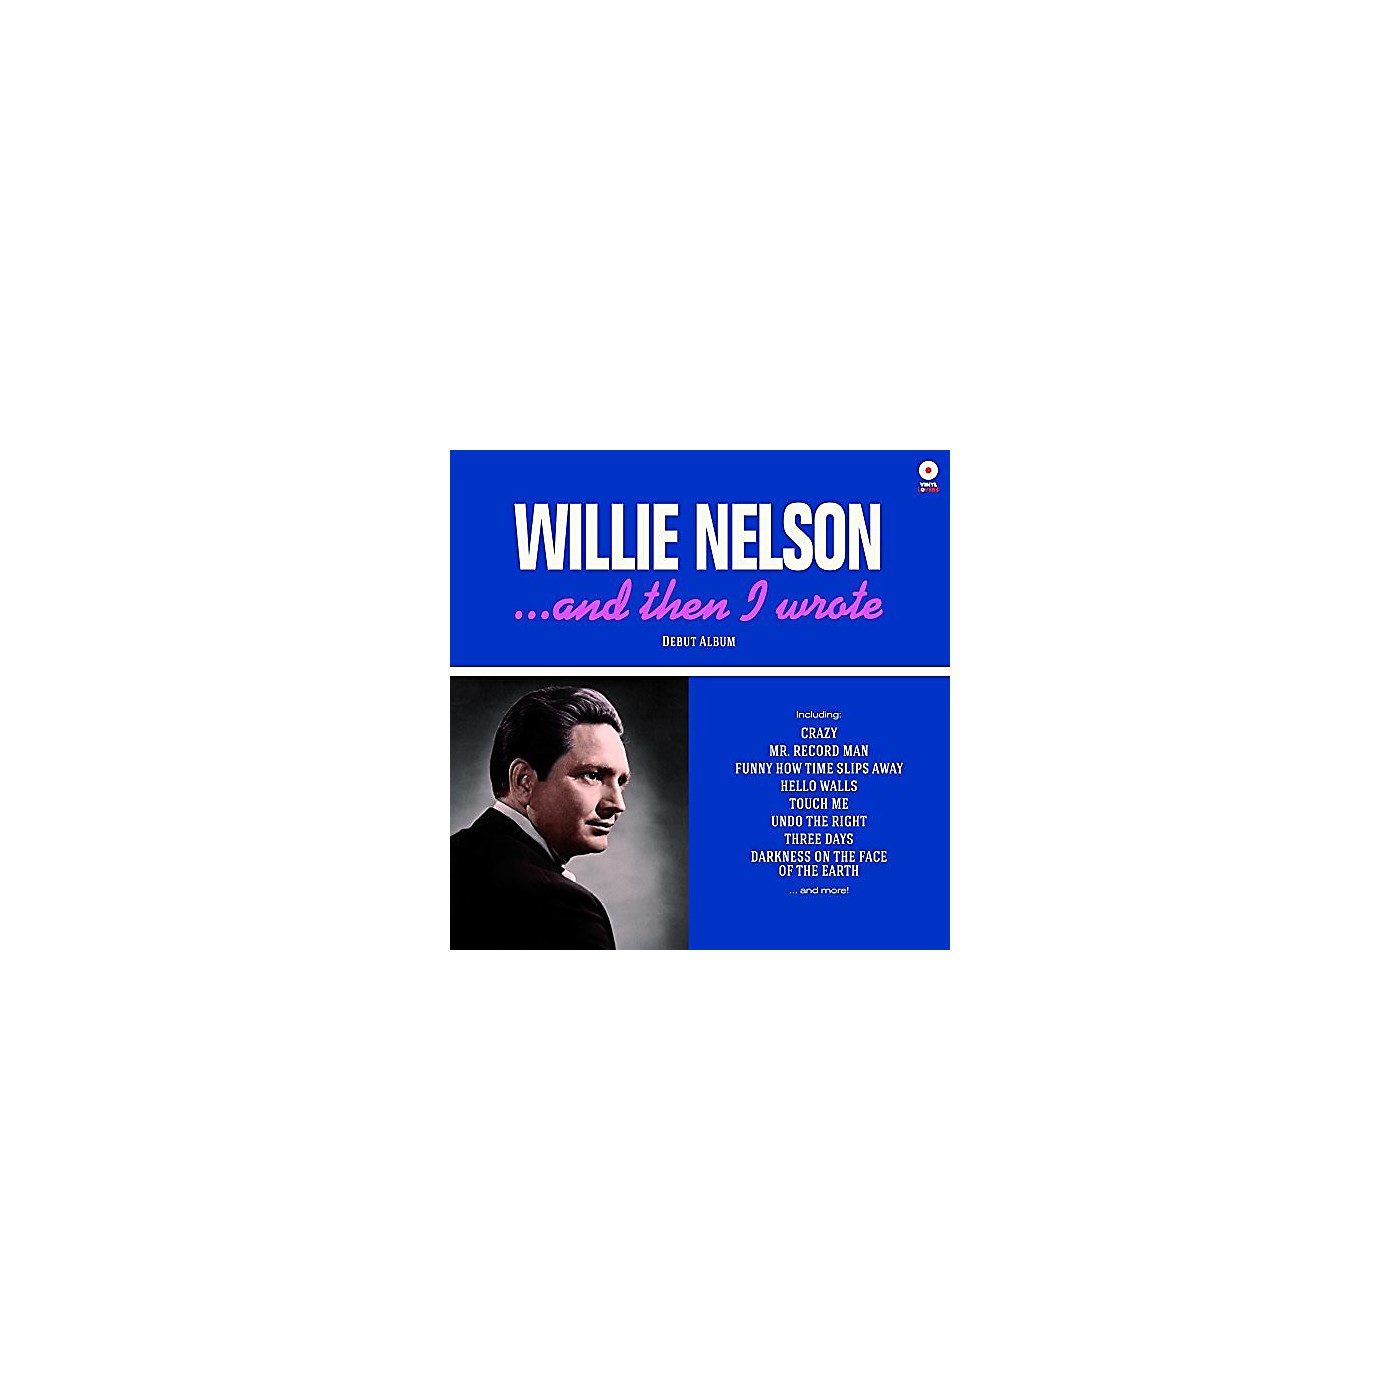 Alliance Willie Nelson - & Then I Wrote thumbnail